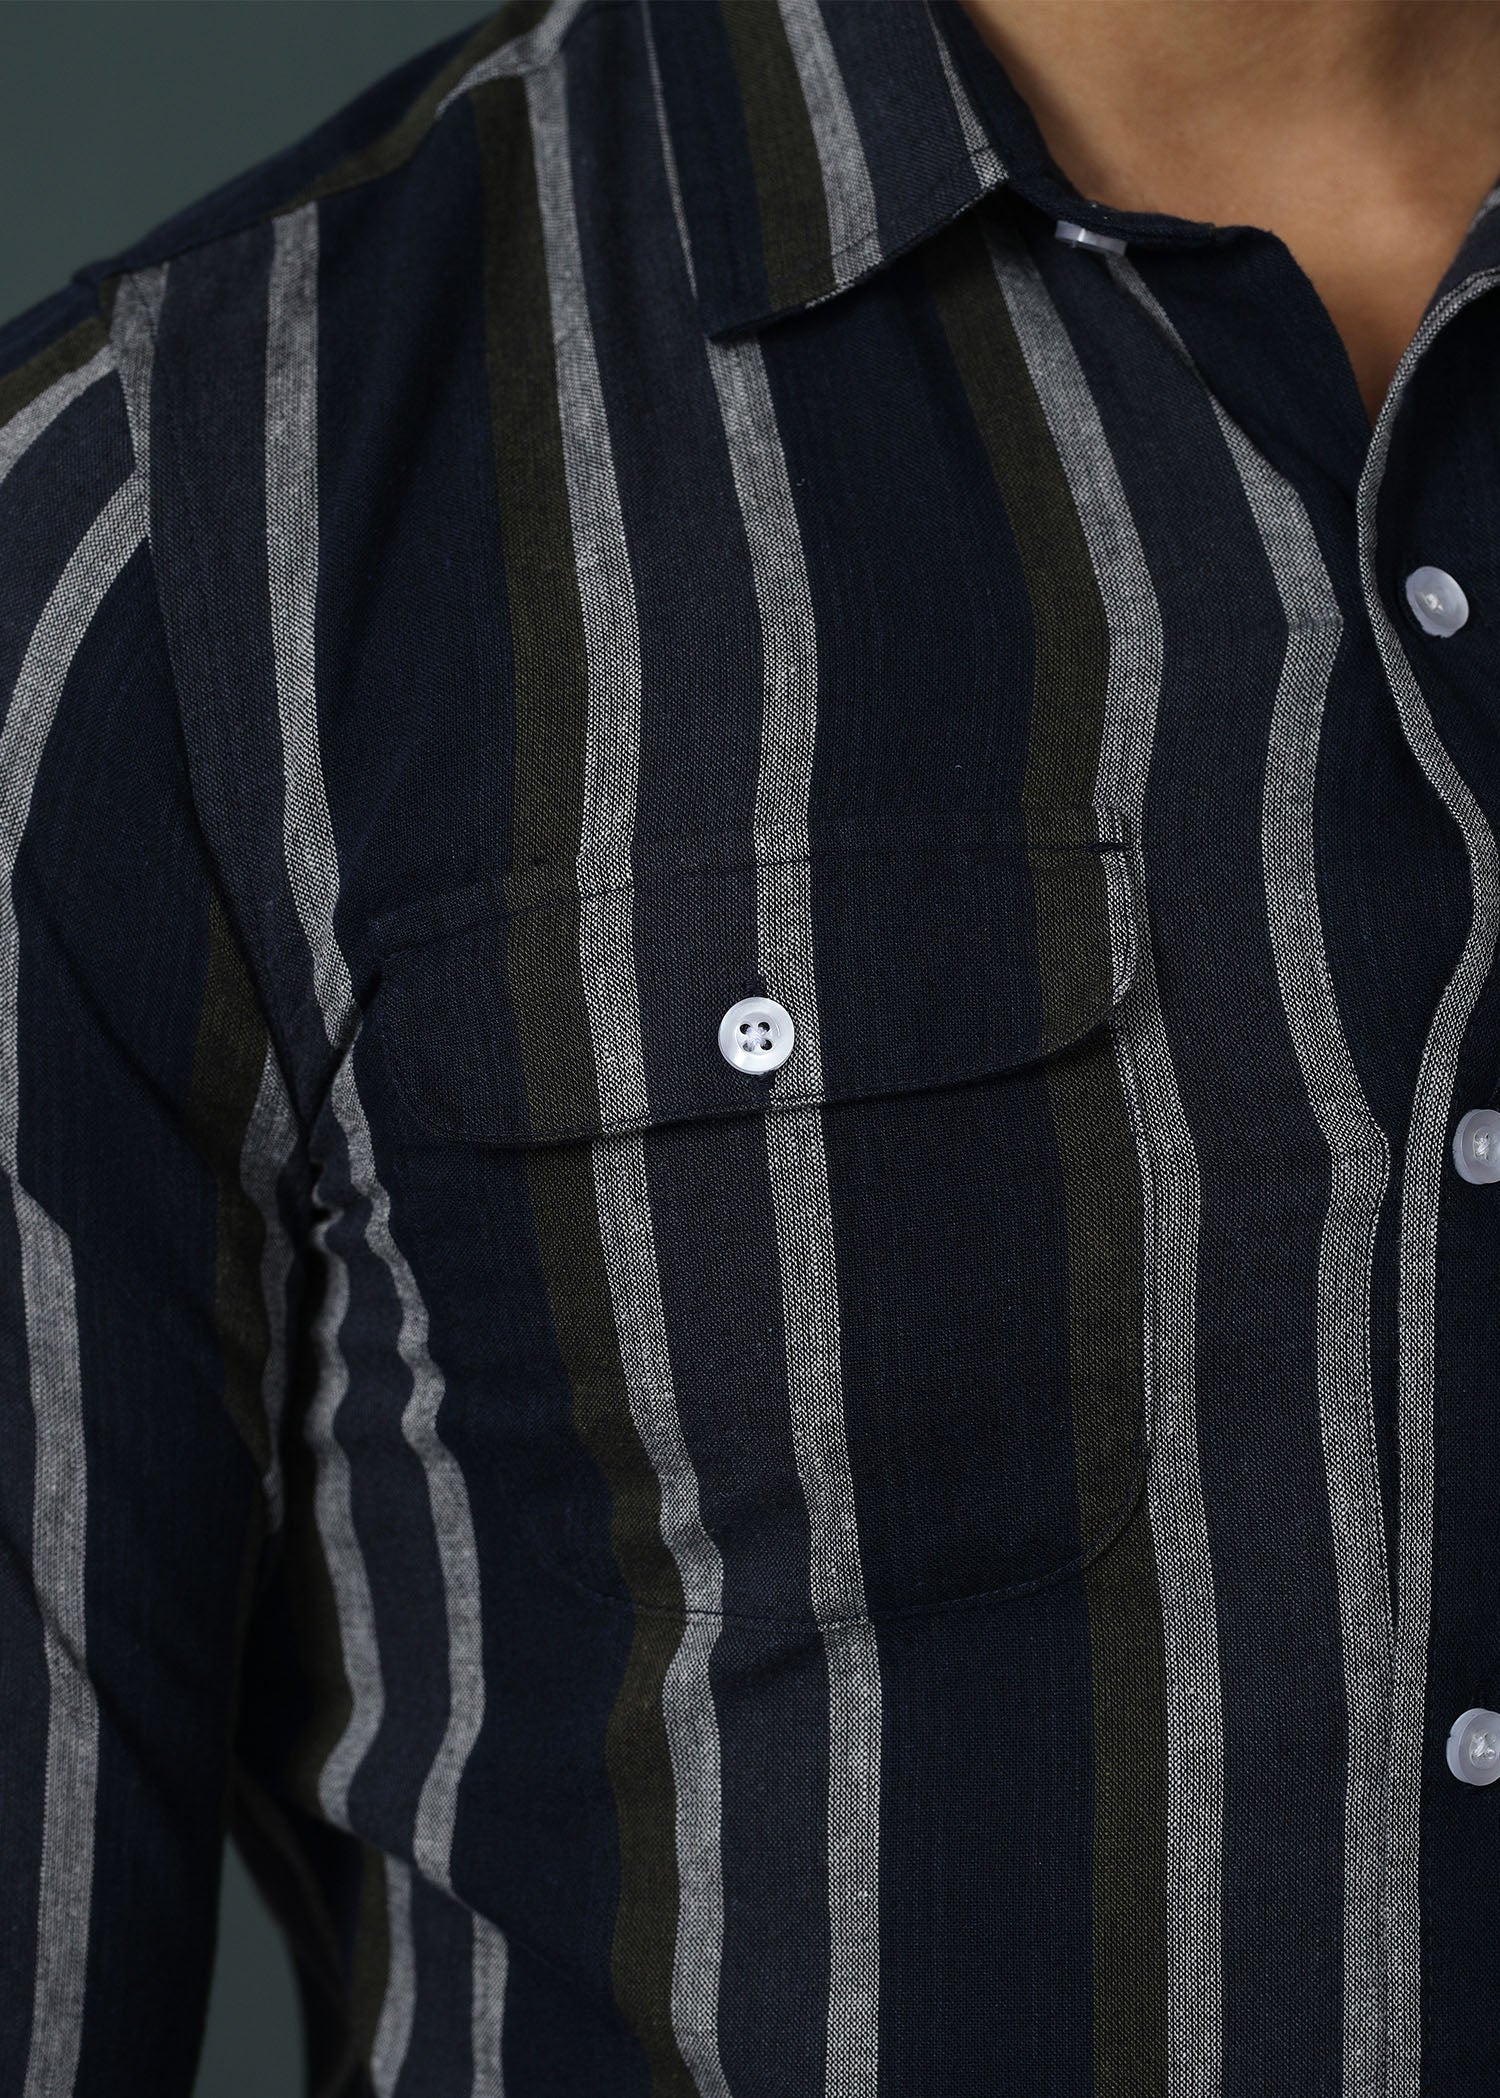 Casual Double Pockets Shirt